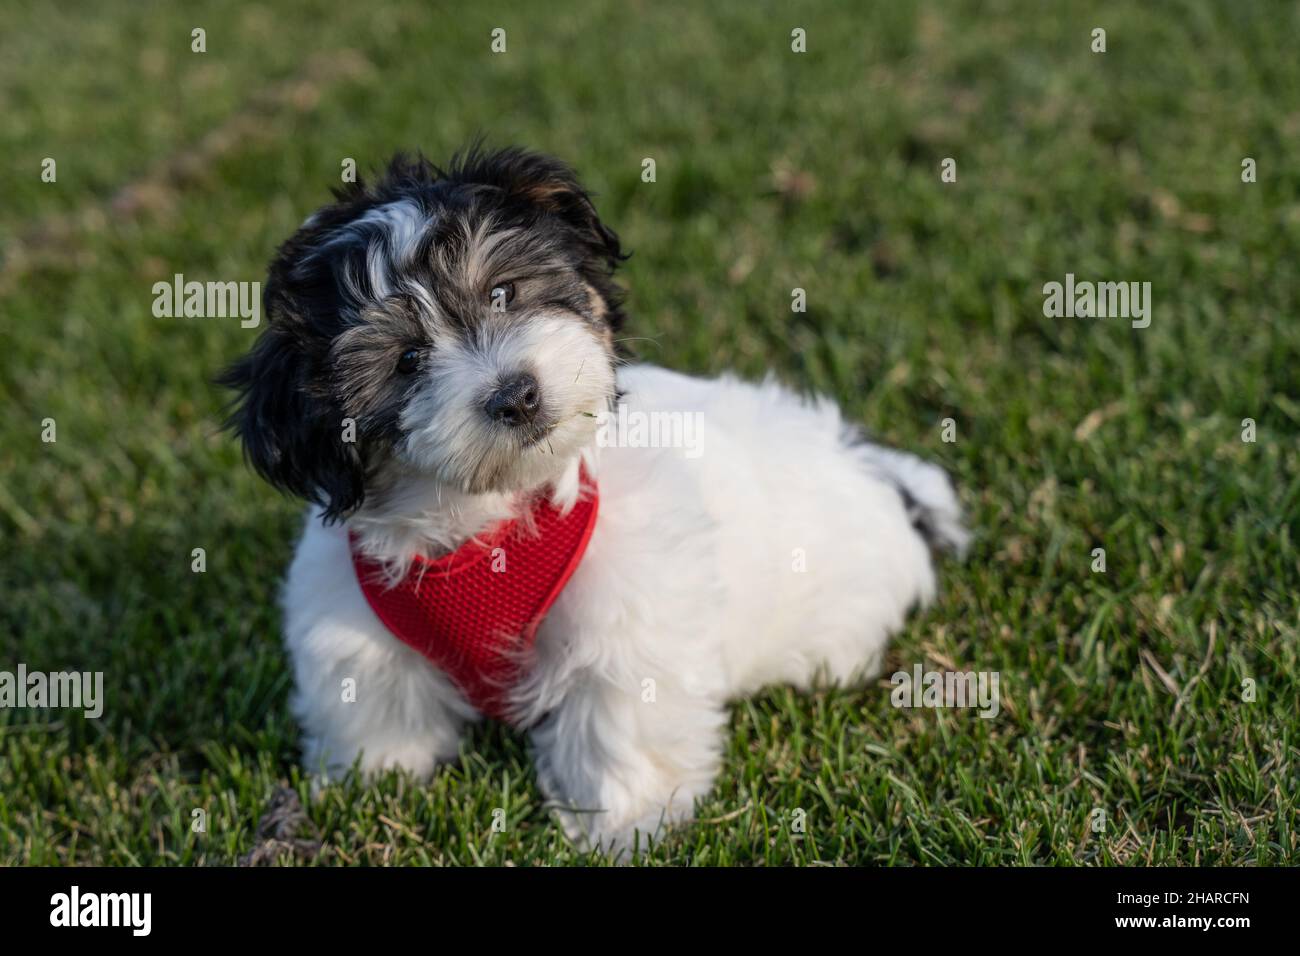 Cute black and white havanese puppy wearing red harness tilts his head as he looks at camera. Stock Photo